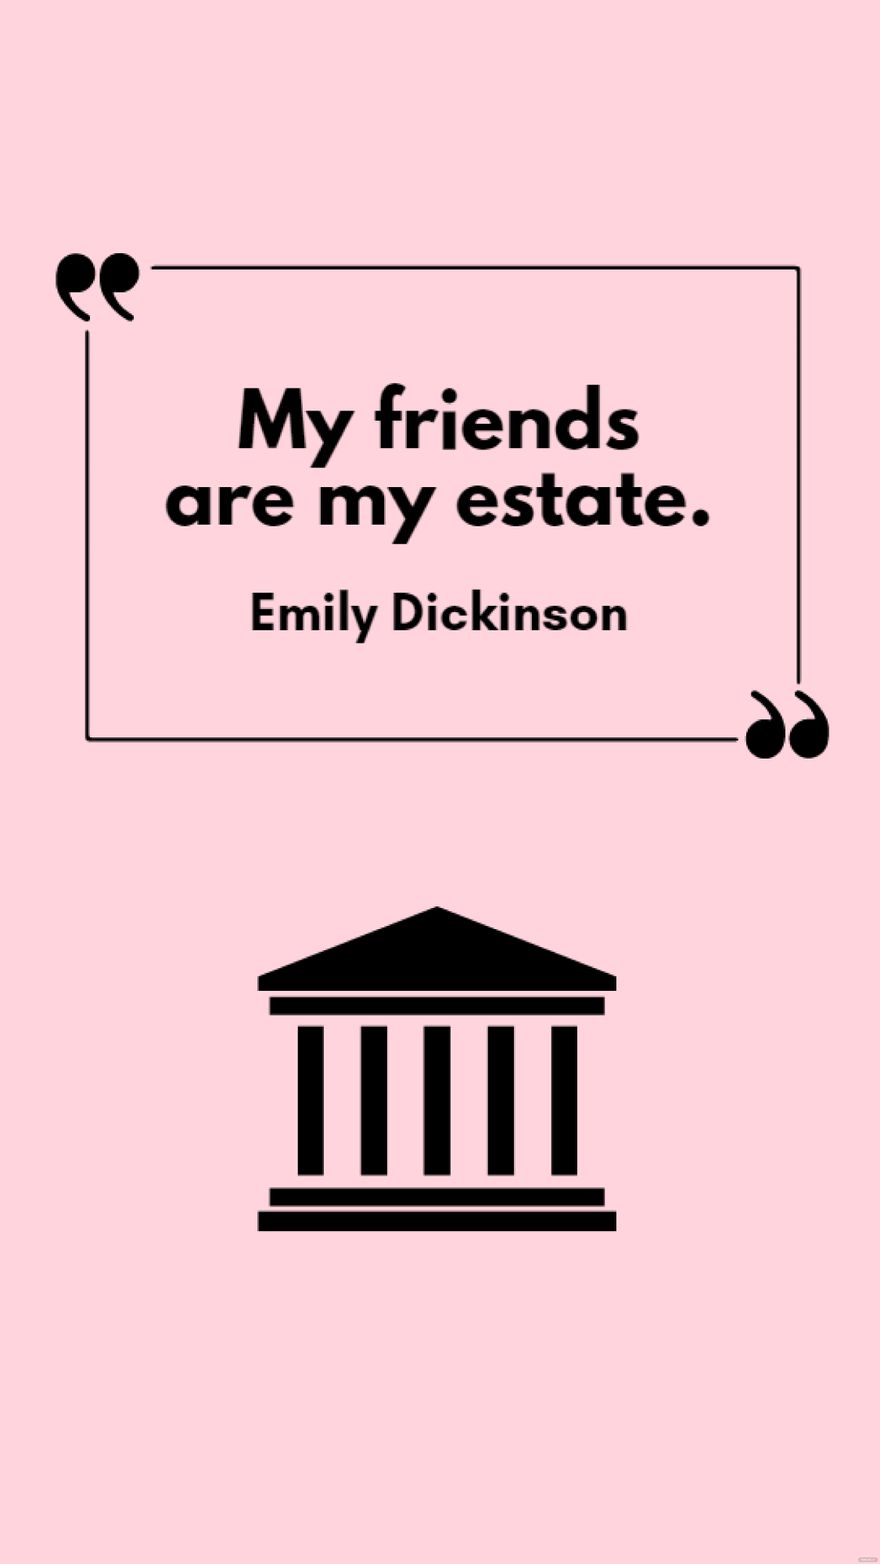 Free Emily Dickinson - My friends are my estate. in JPG